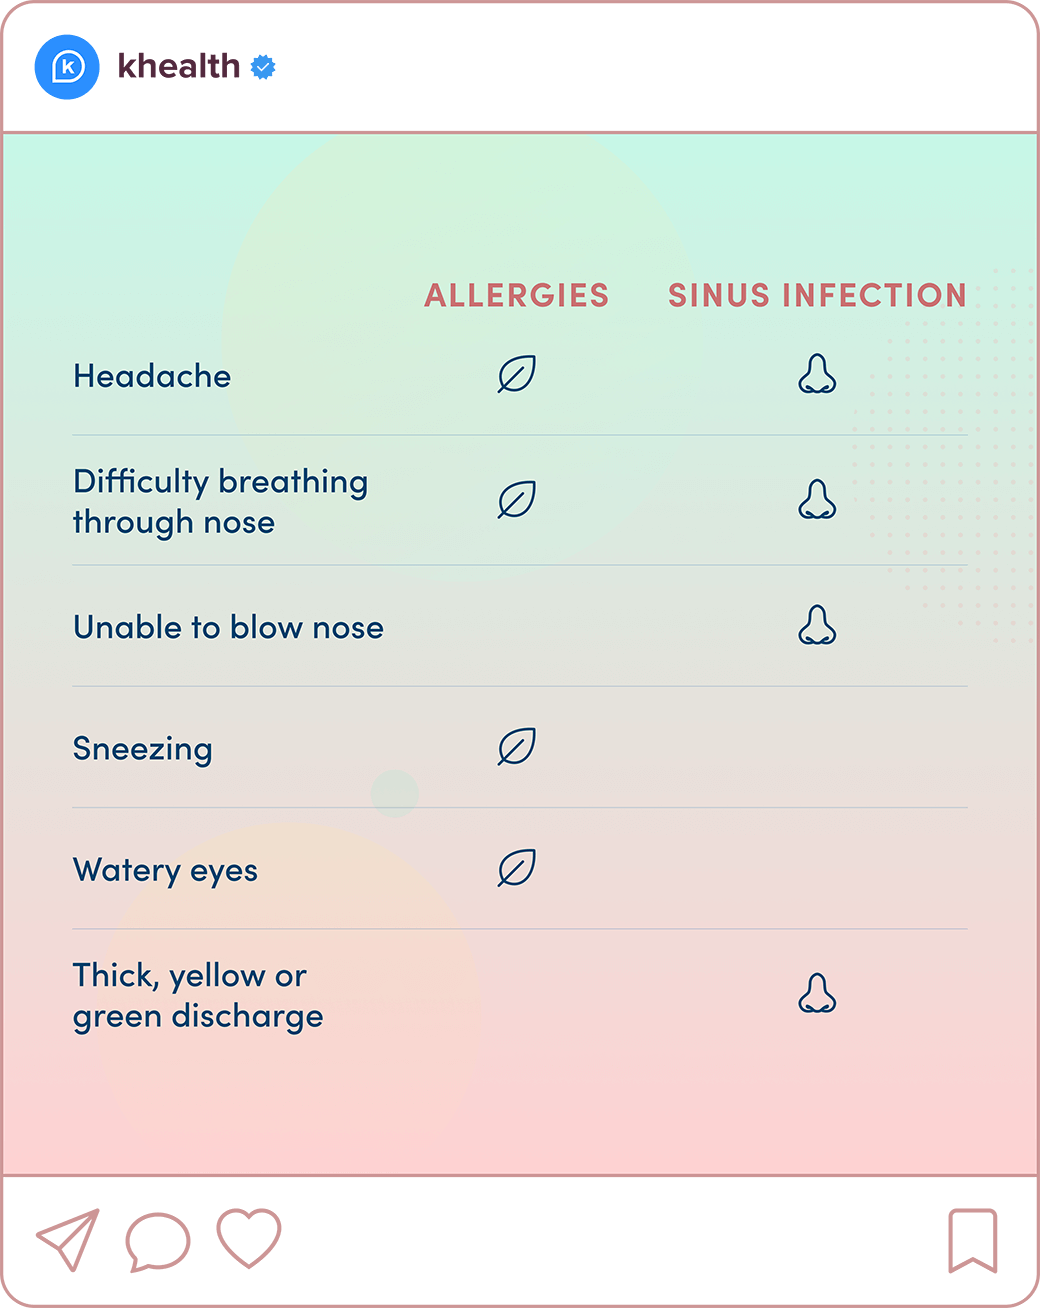 Instagram post with a table comparing the symptoms of allergies and a sinus infection